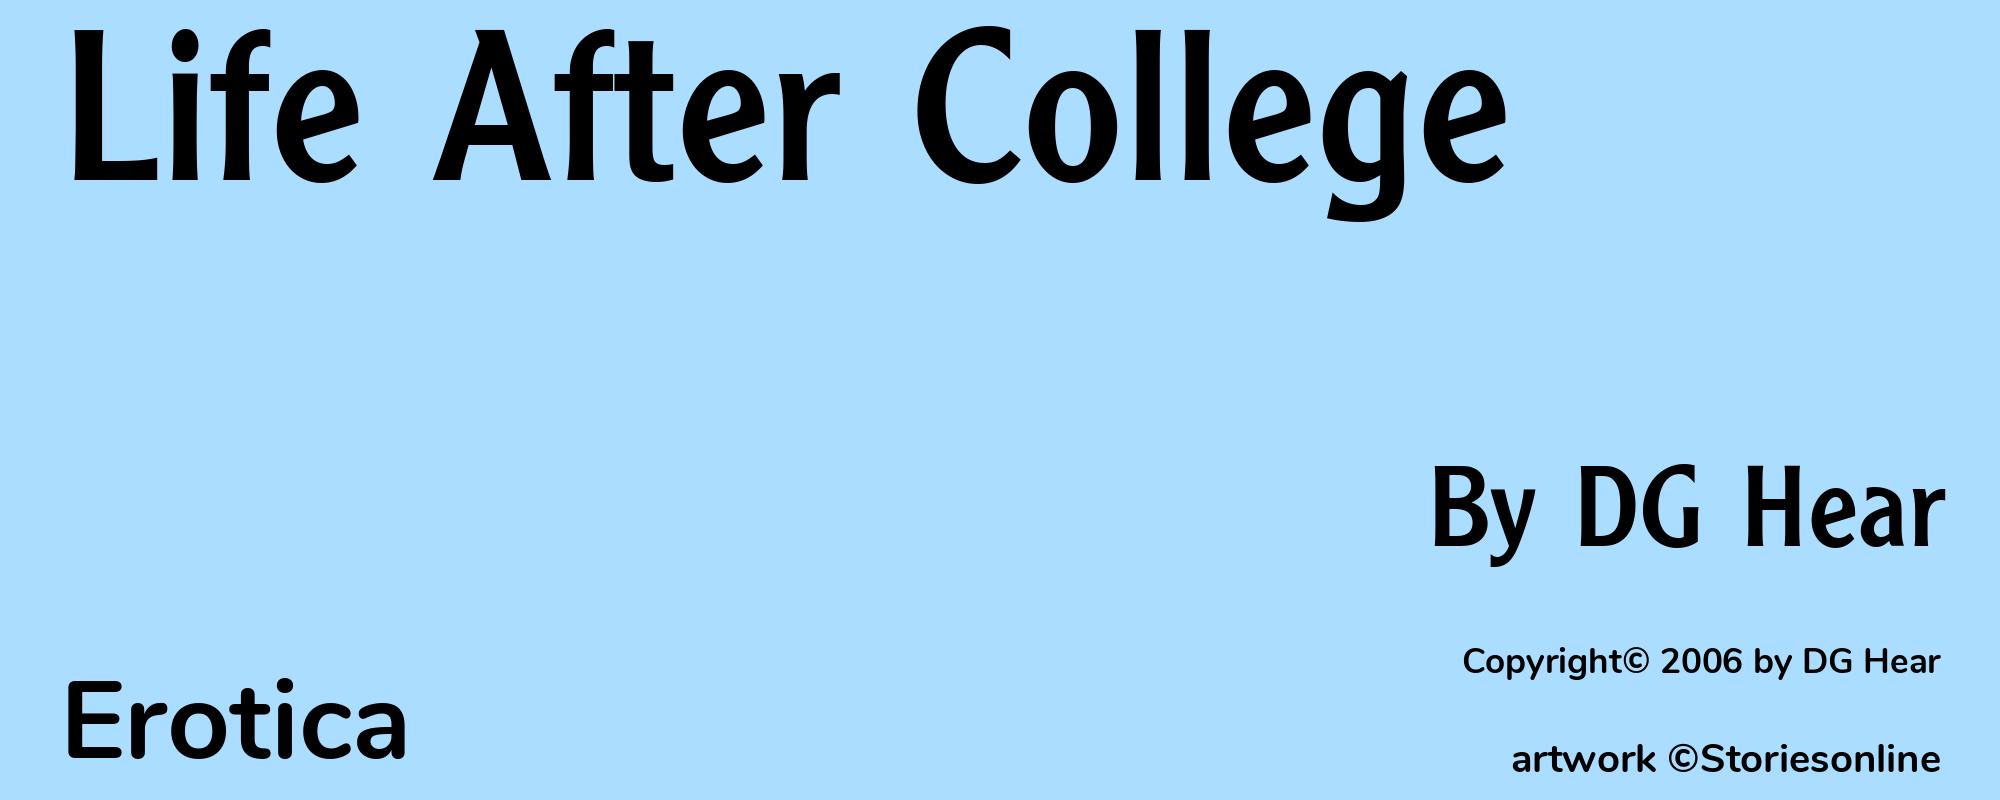 Life After College - Cover